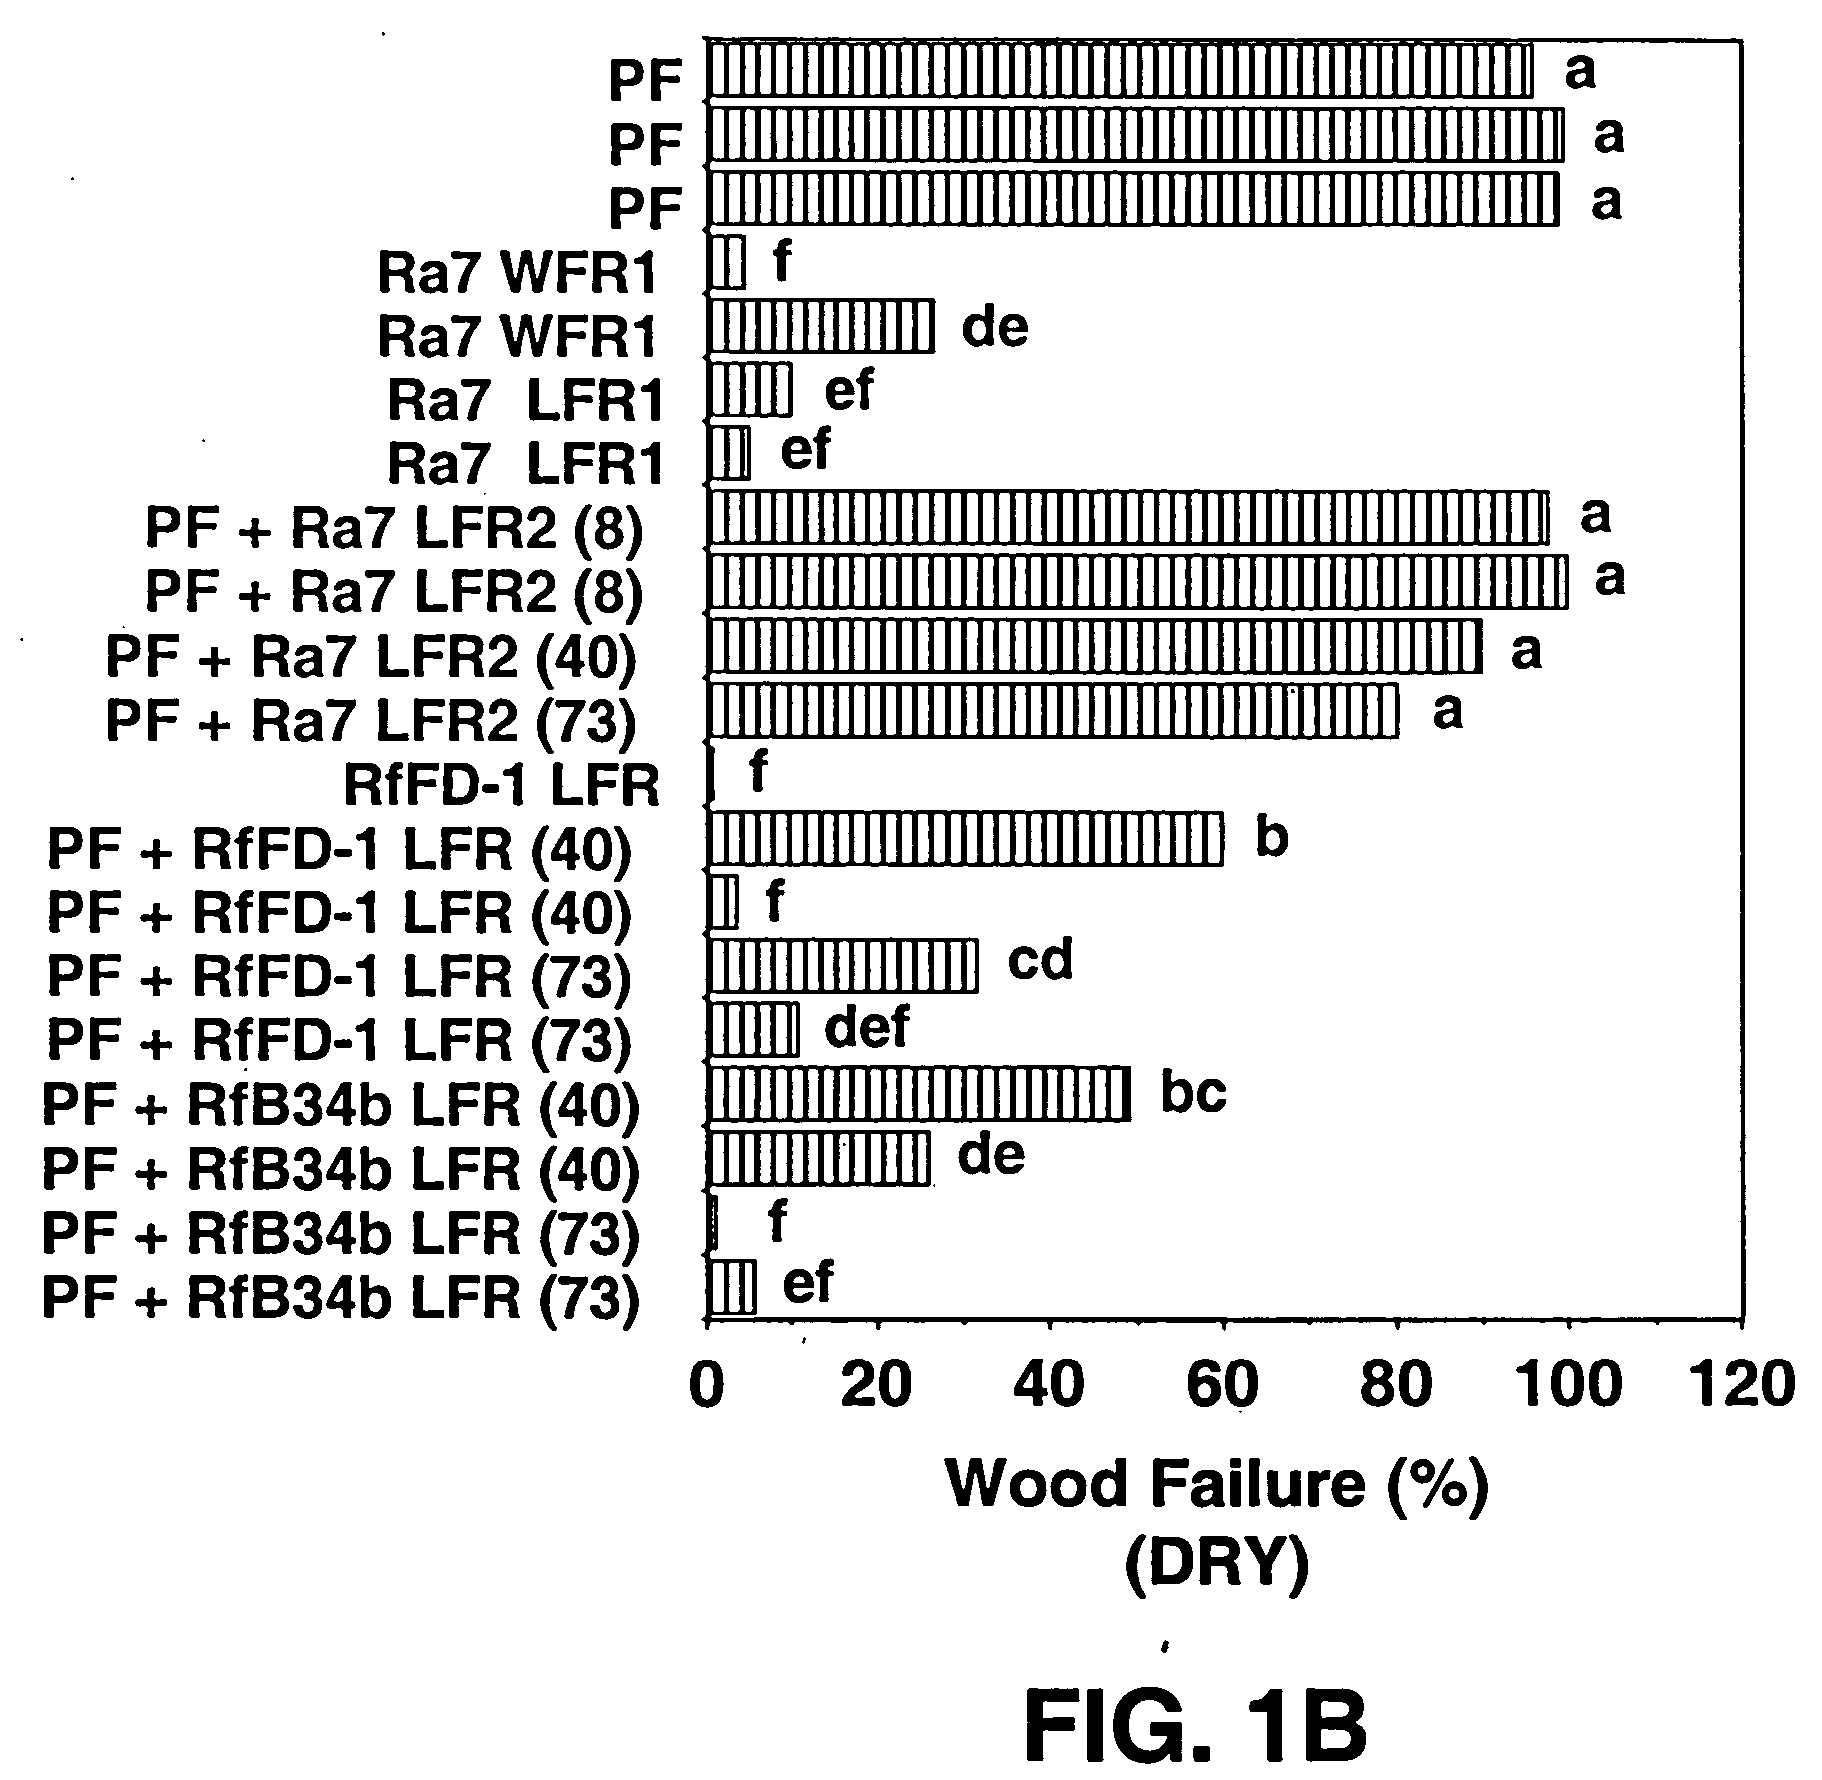 Wood adhesives containing solid residues of biomass fermentations